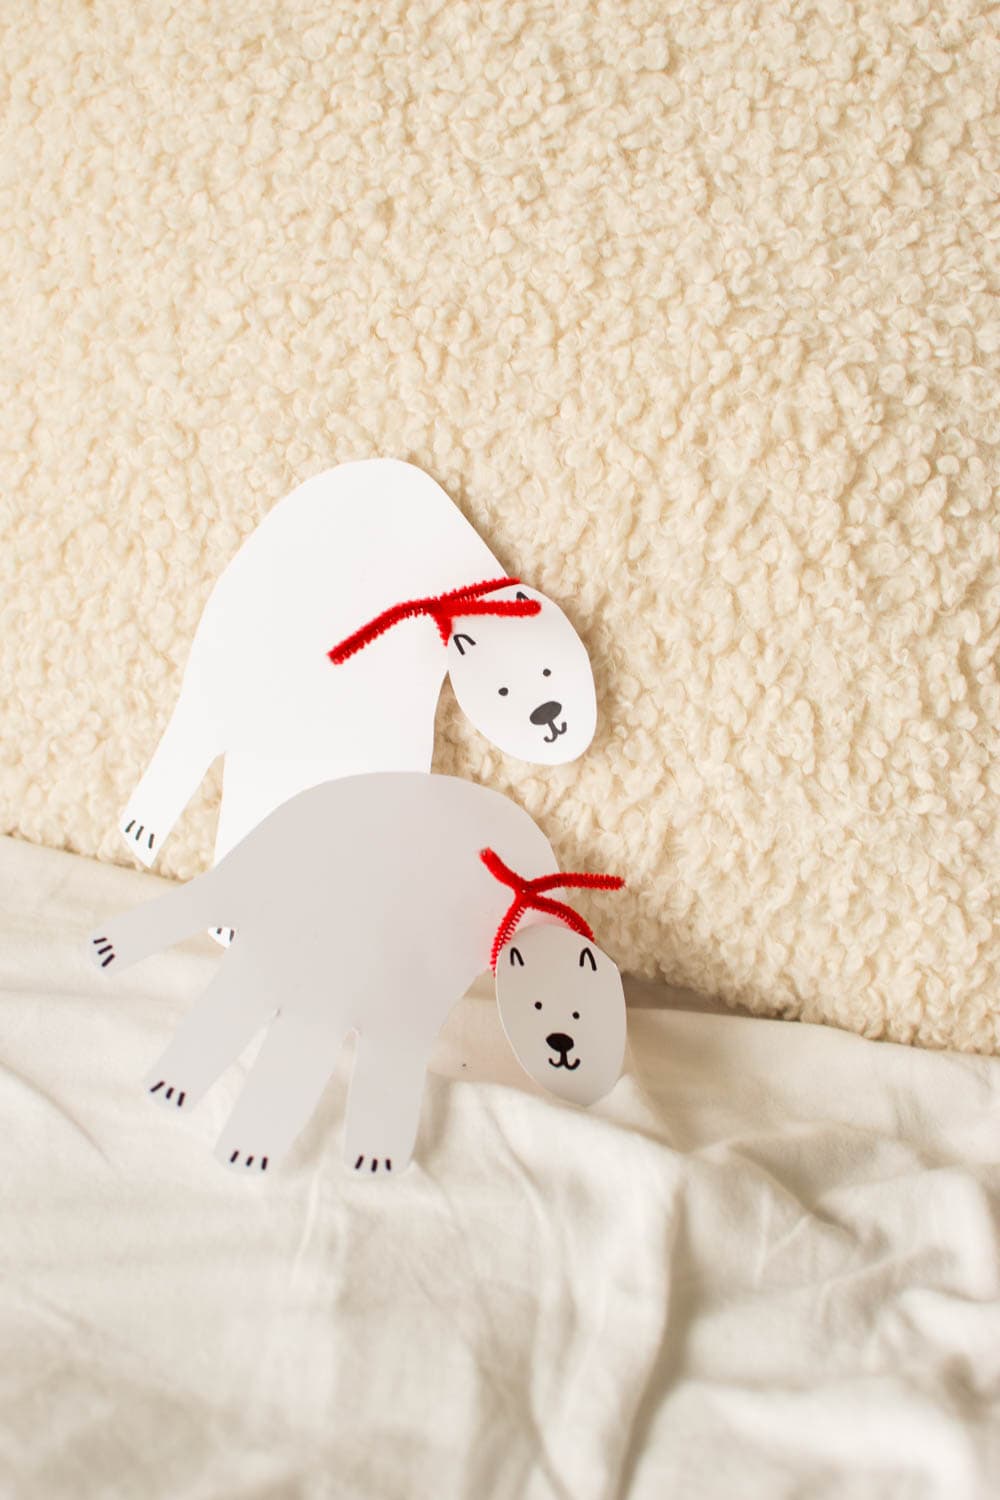 Cardstock polar bear leaning up against a beige pillow/backdrop